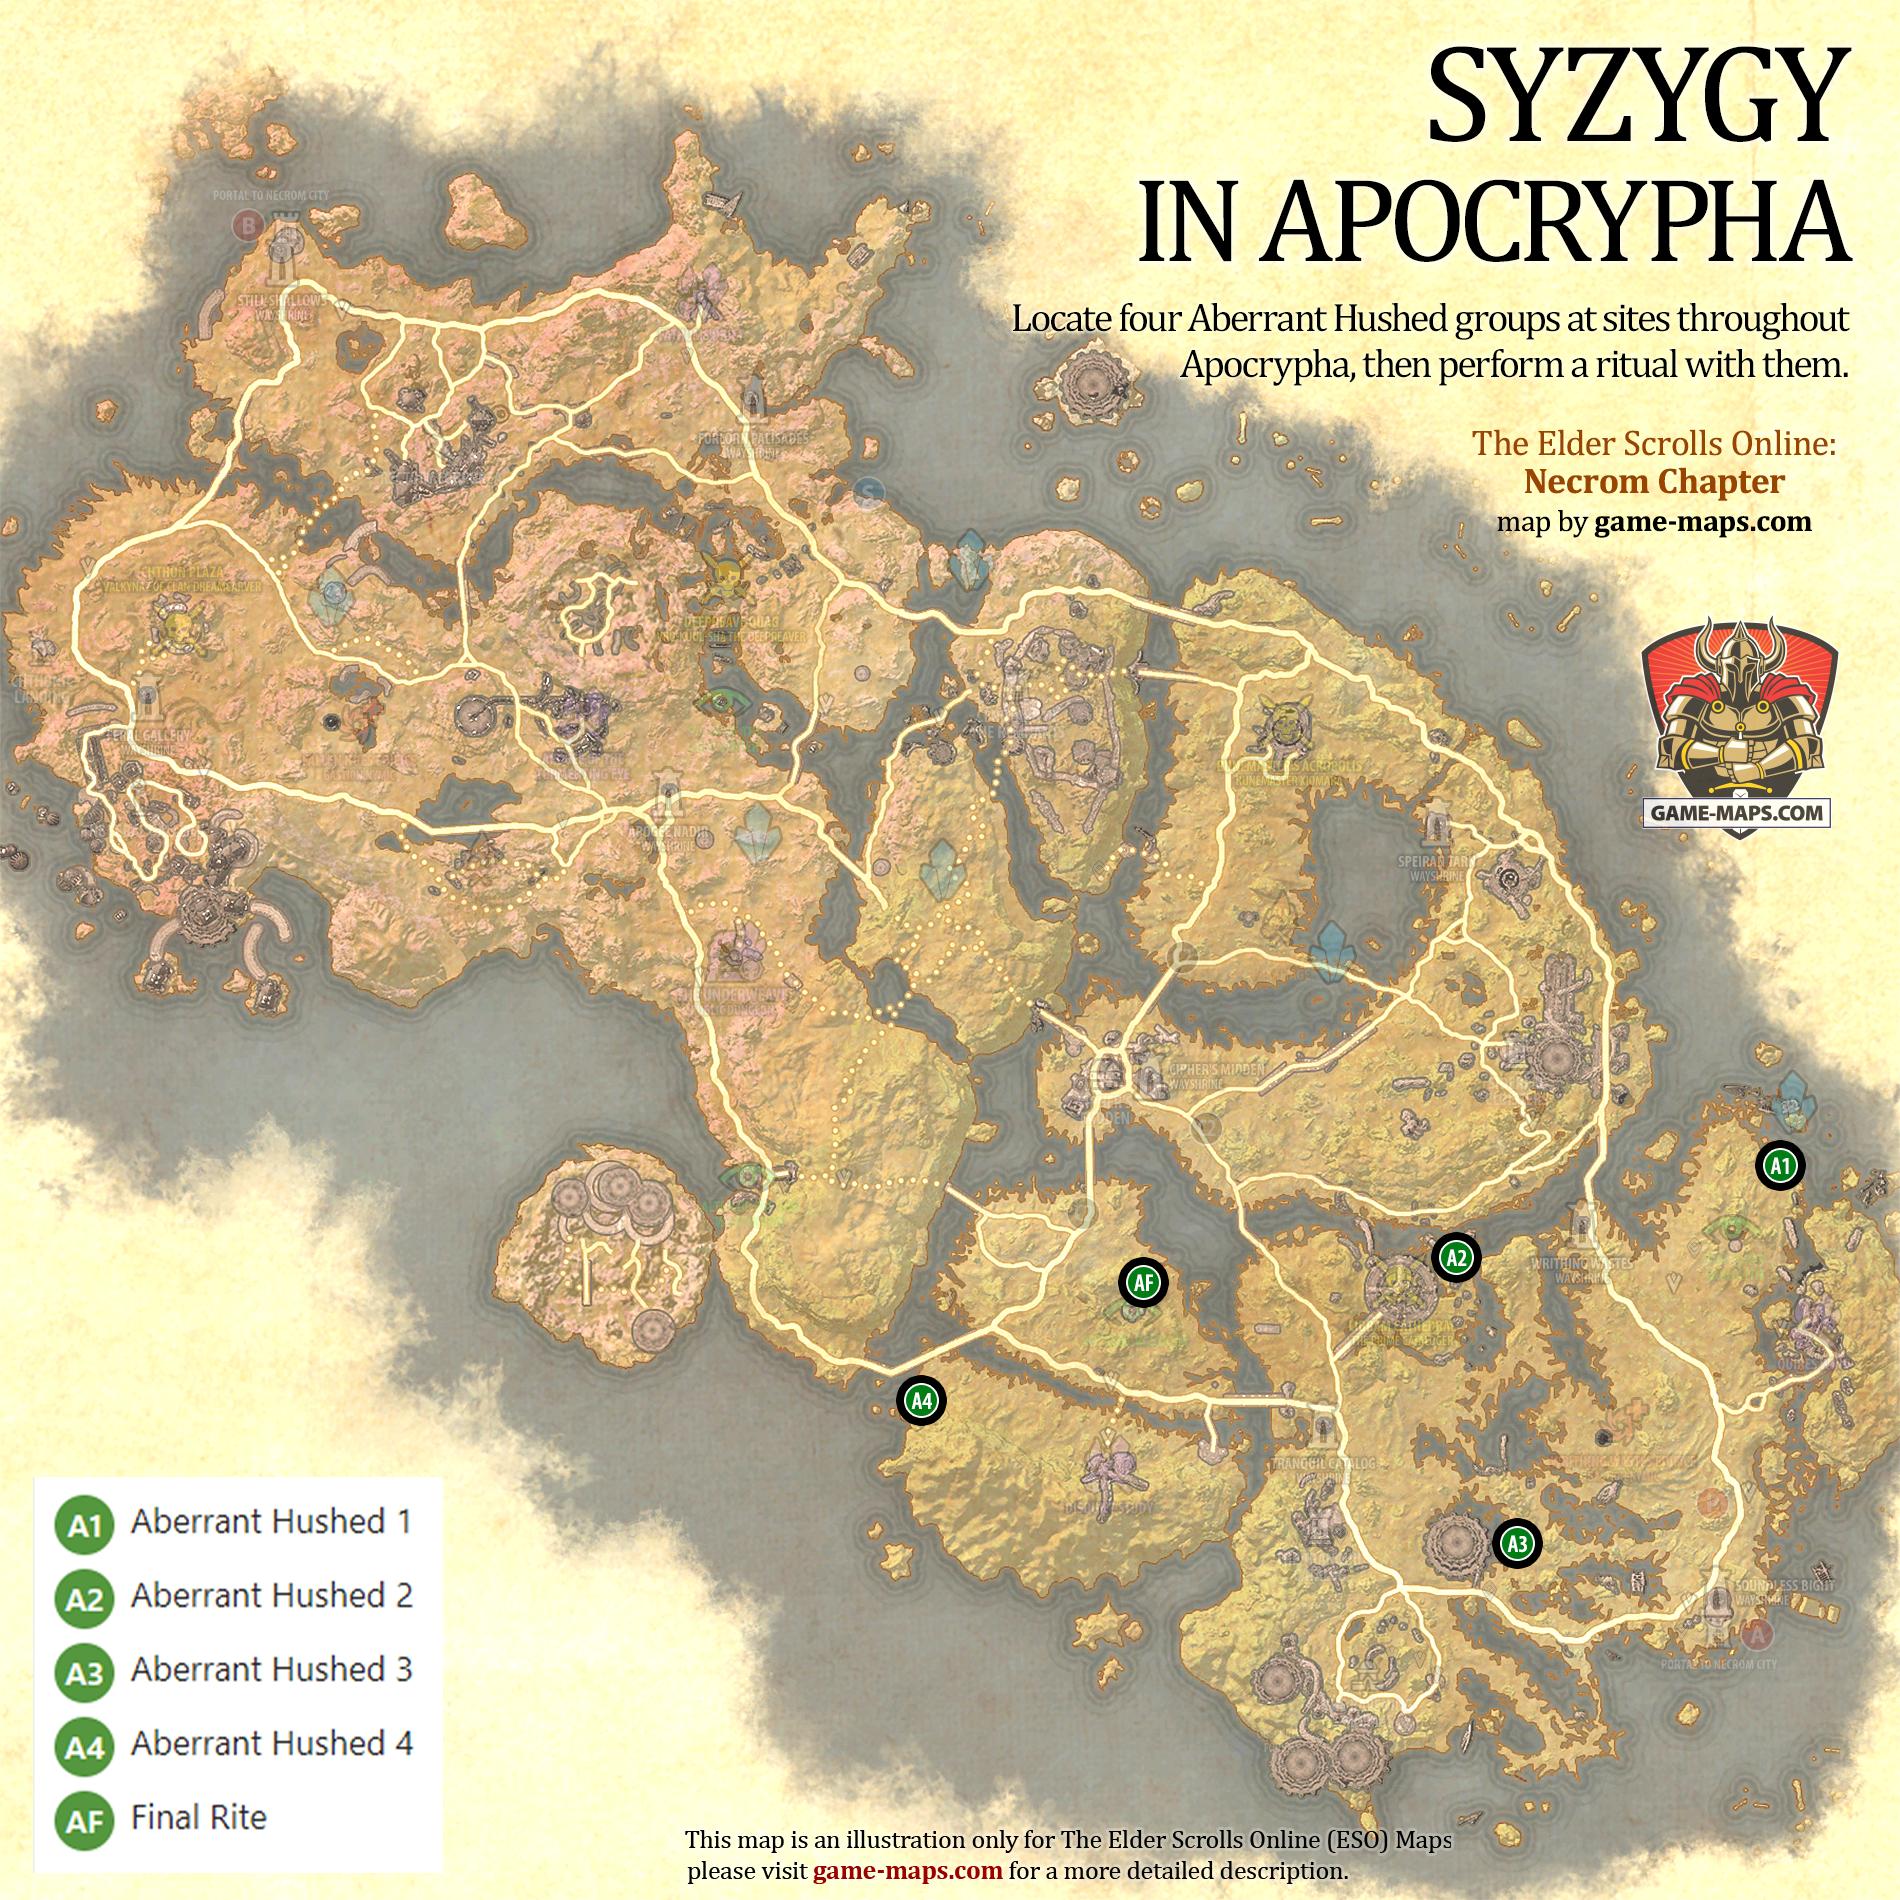 Location of Aberrant Hushed groups in Apocrypha for Syzygy in The Elder Scrolls Online (ESO)